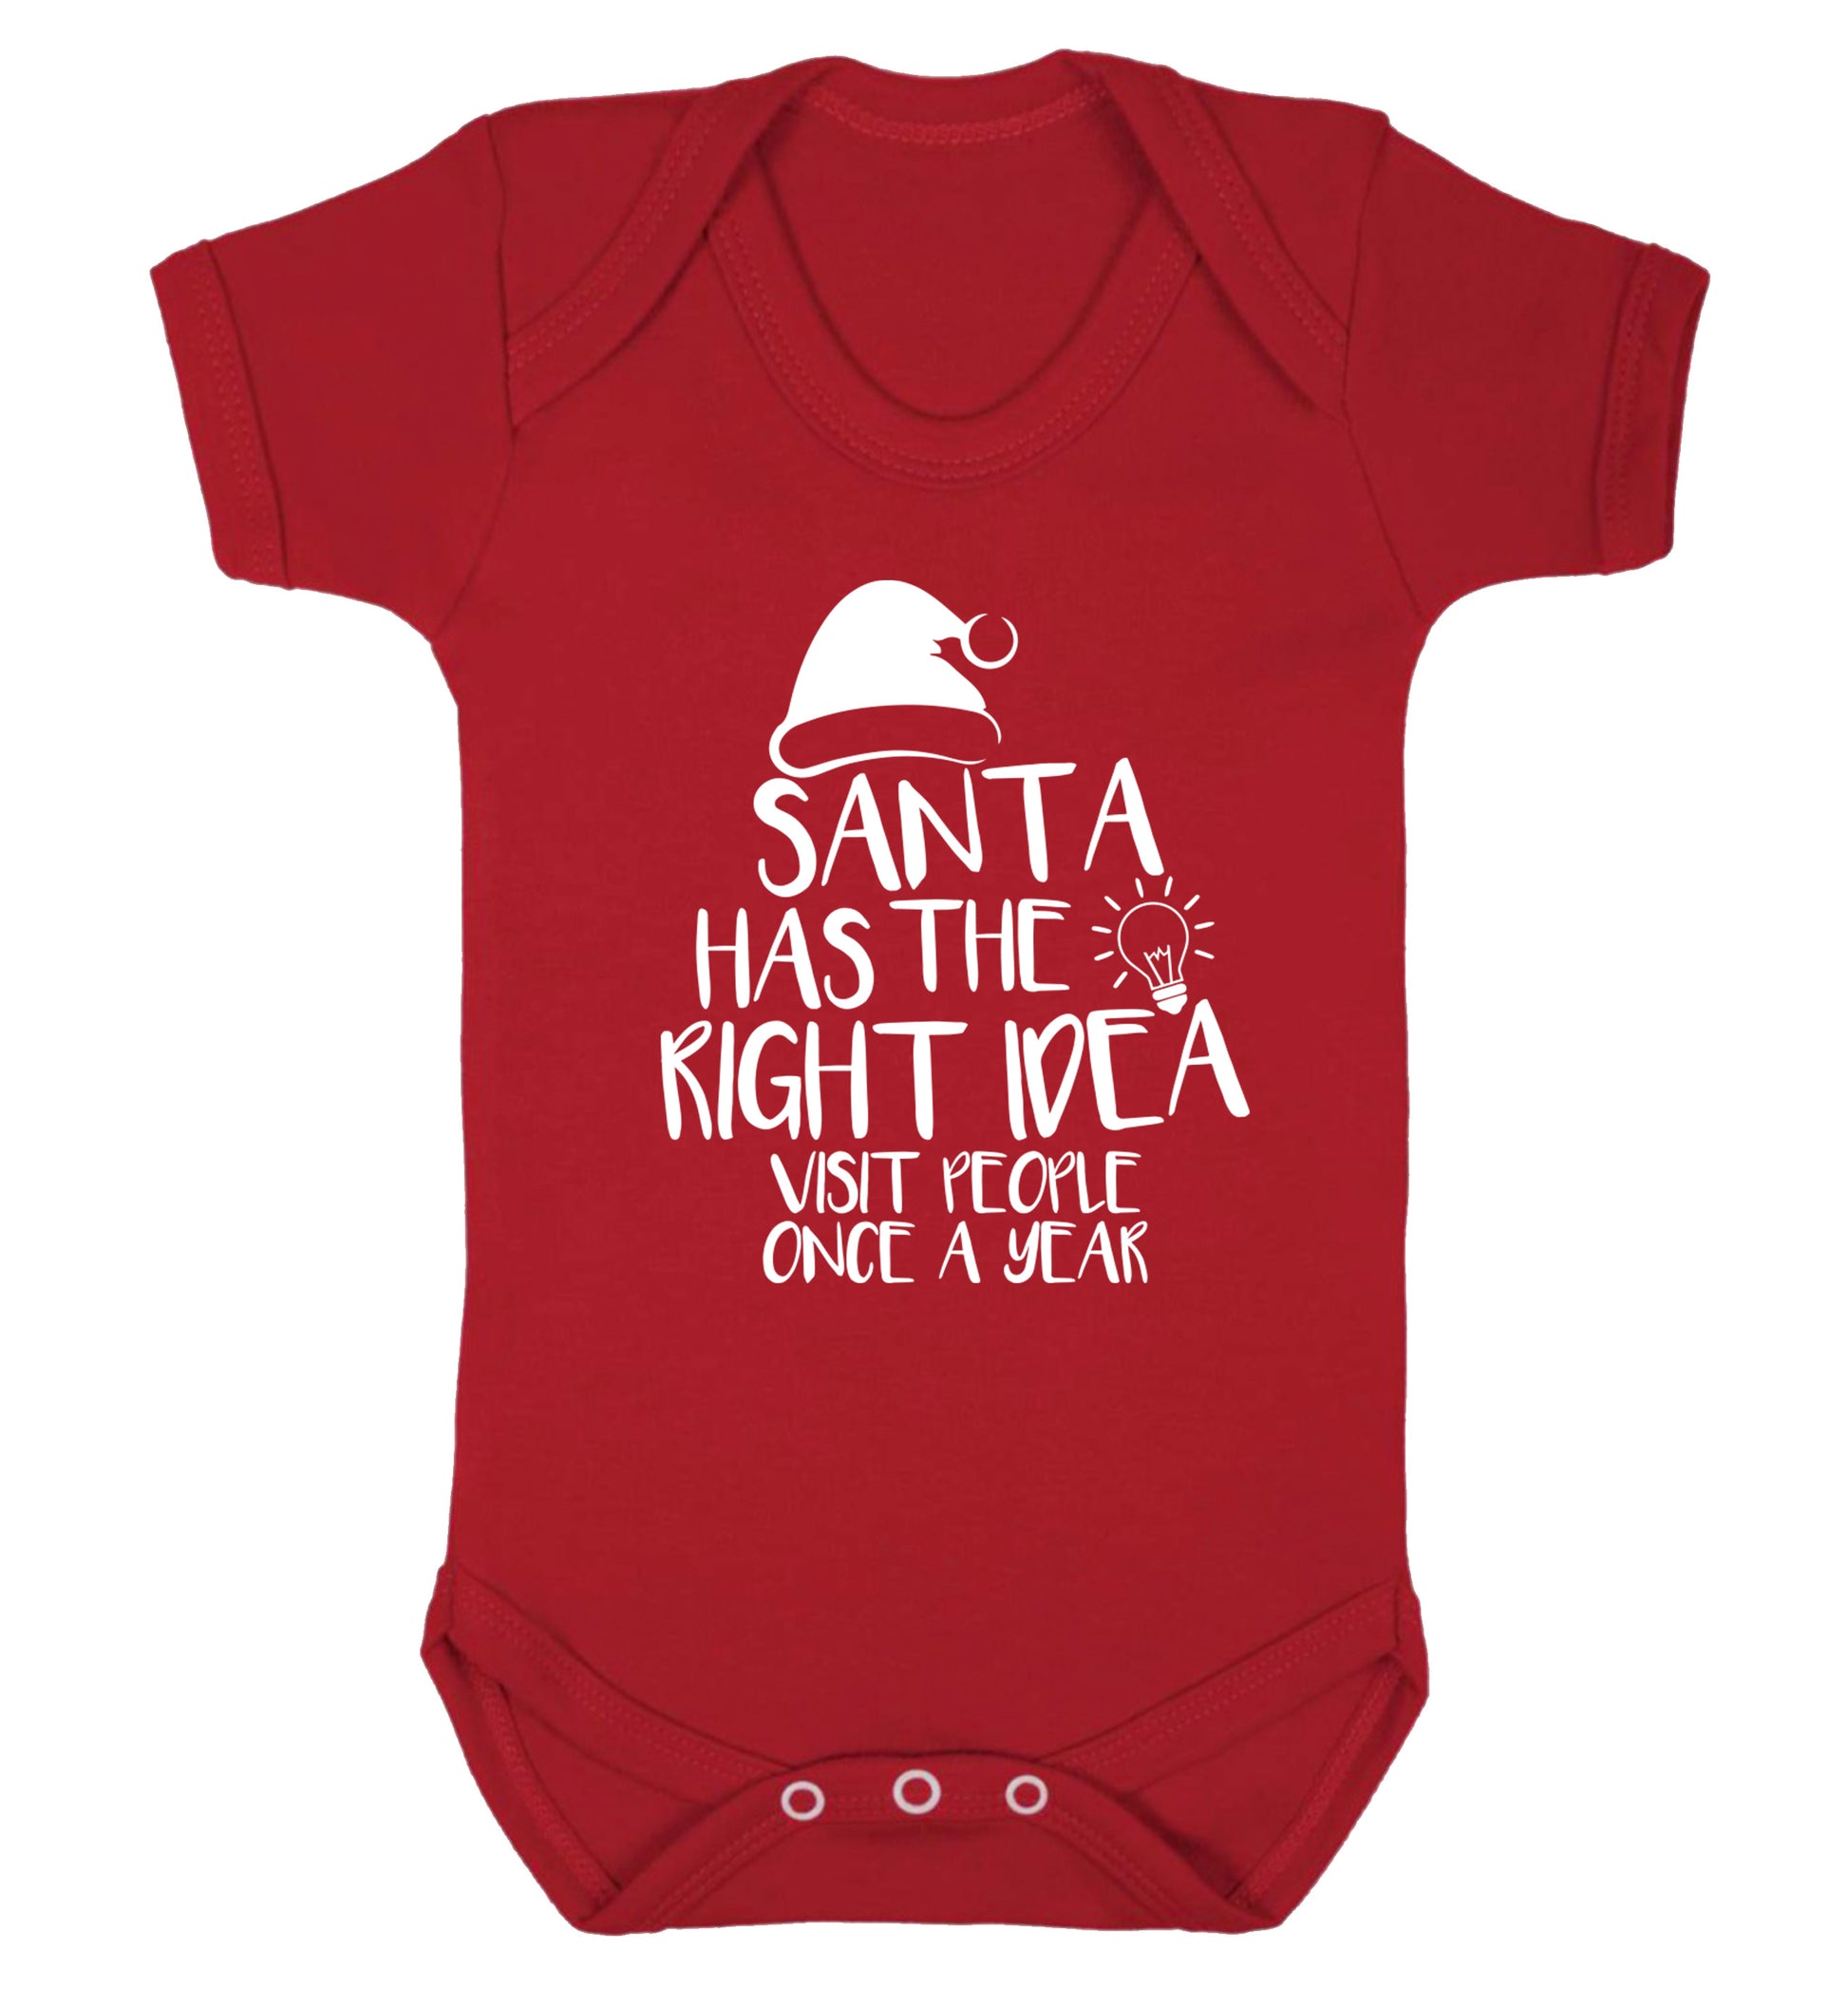 Santa has the right idea visit people once a year Baby Vest red 18-24 months